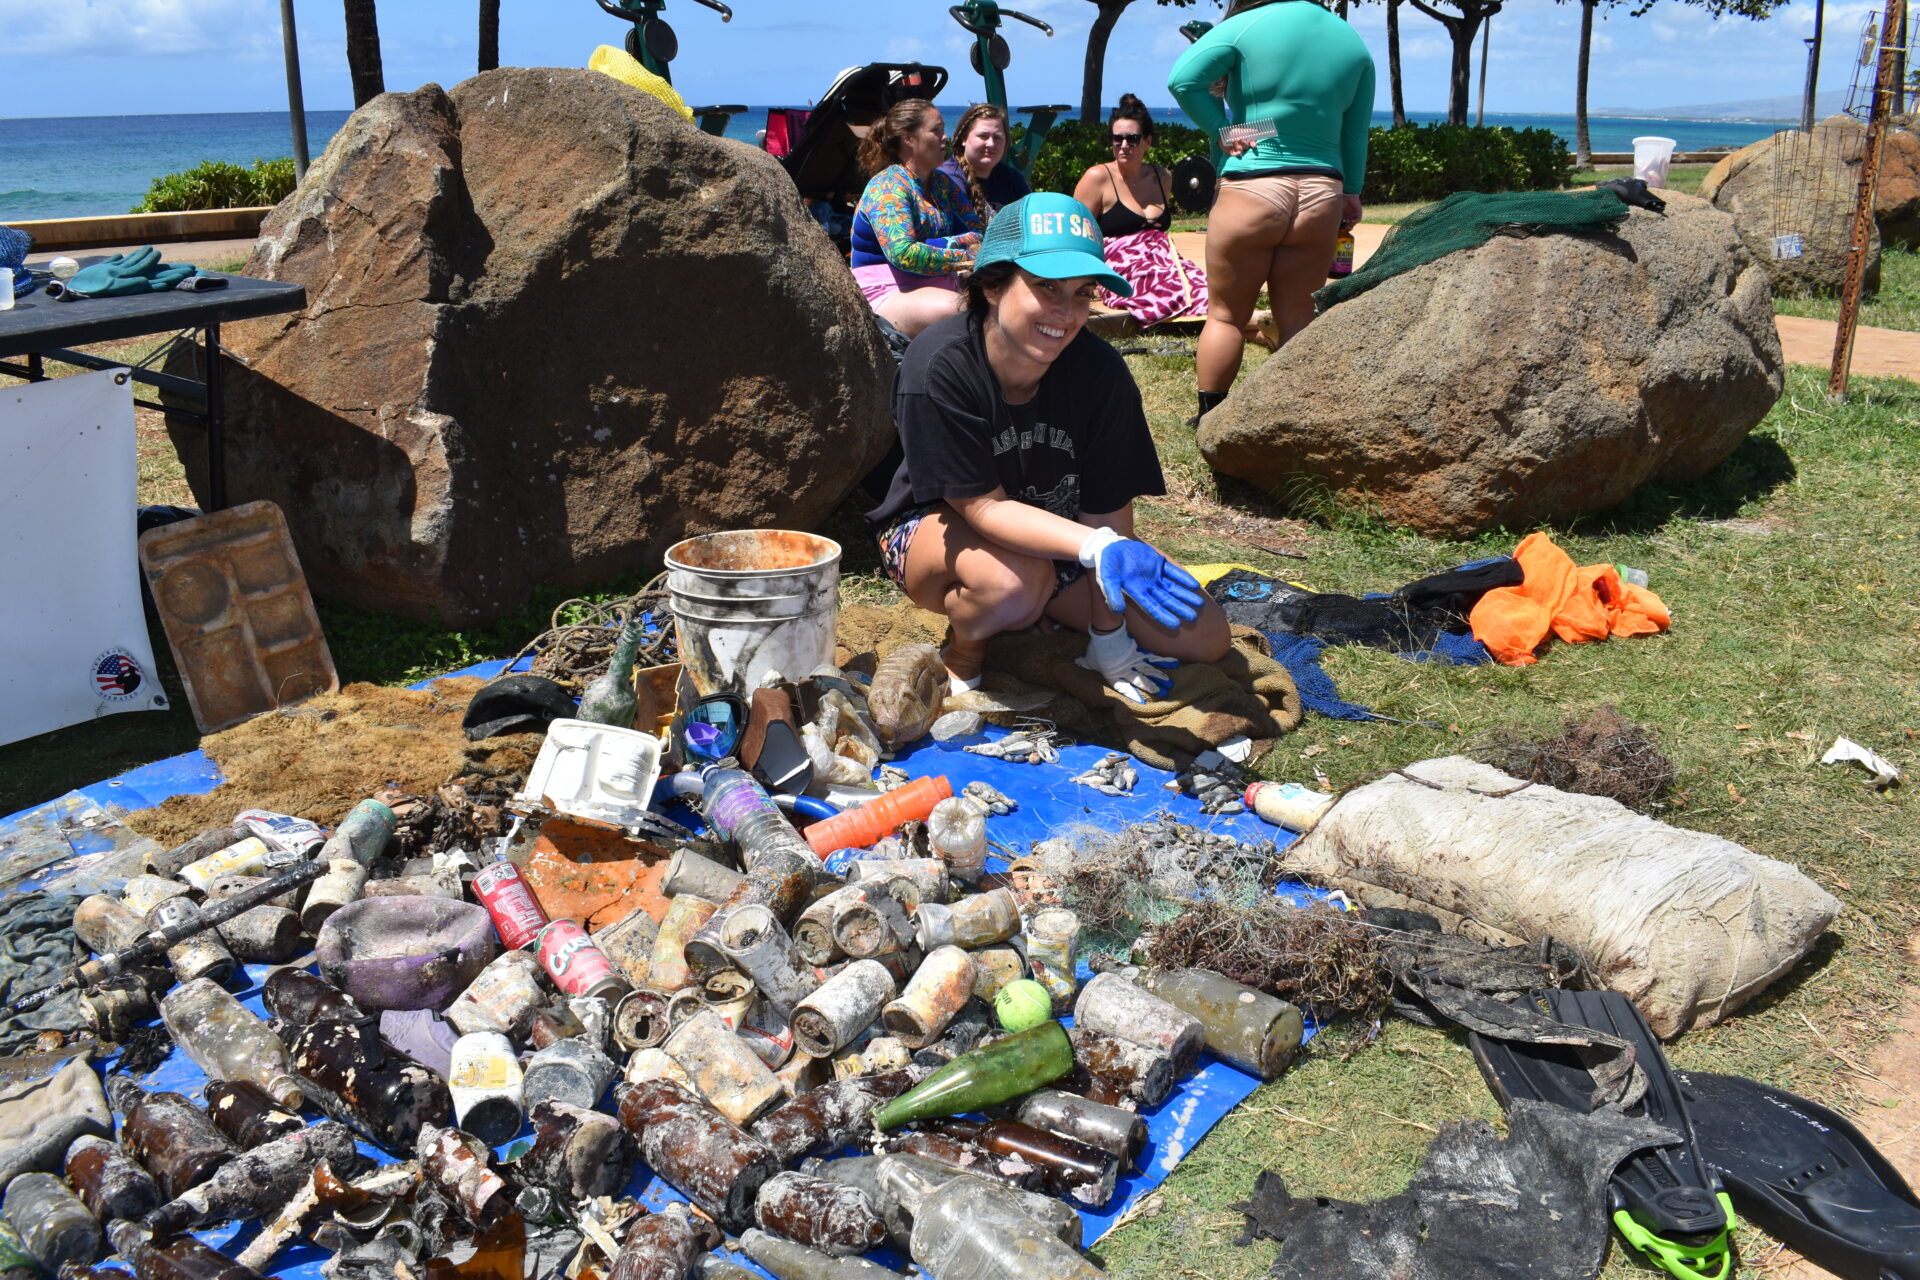 Volunteers at the Nudi Wear cleanup at Point Panic sorting through 402 pounds of trash that was removed from the ocean at the popular dive site on Oahu